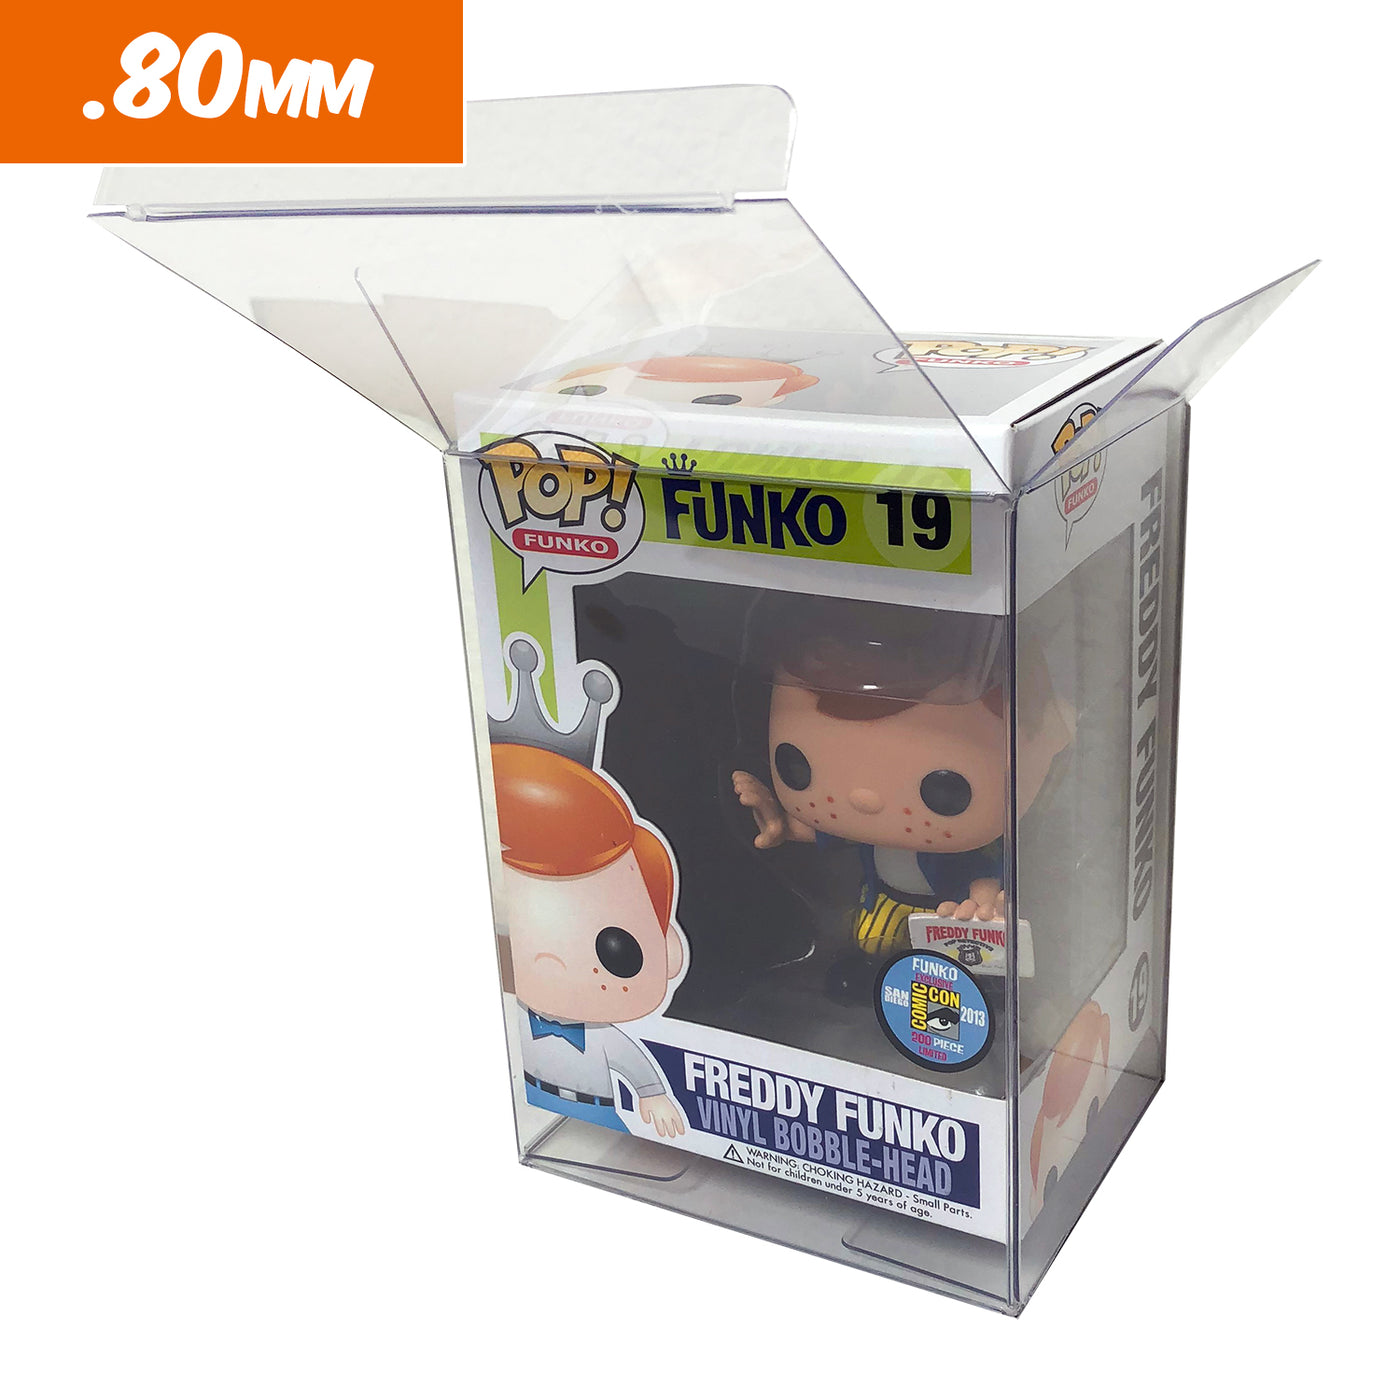 ULTRA HEAVY DUTY Flex Stack Pop Protectors for 4 in. Funko Vinyl Collectible Figures, 80mm thick popshield vaulted vinyl